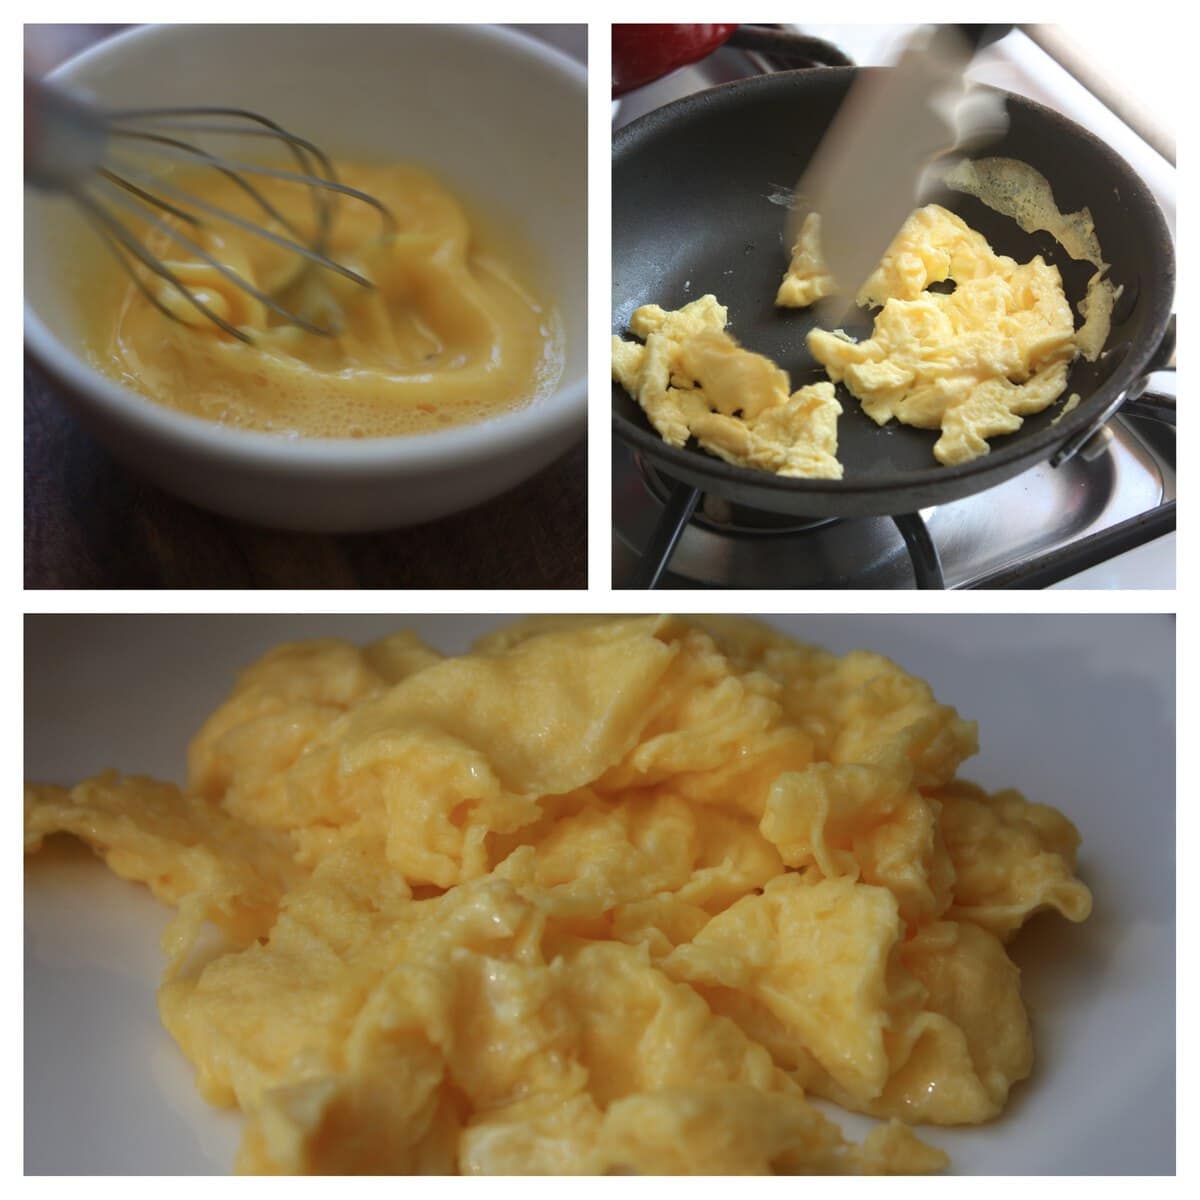 Beat Eggs With A Little Half And Half.  Heat Non-Stick Pan  And Add Some Canola Oil.  Pour Eggs Into Pan And Work With Heatproof Spatula Quickly And For The Entire Time.  Don't Walk Away From Pan Unless You Like A Hard Scrambled Egg. Remove From Heat Just Before They Are Cooked Through.